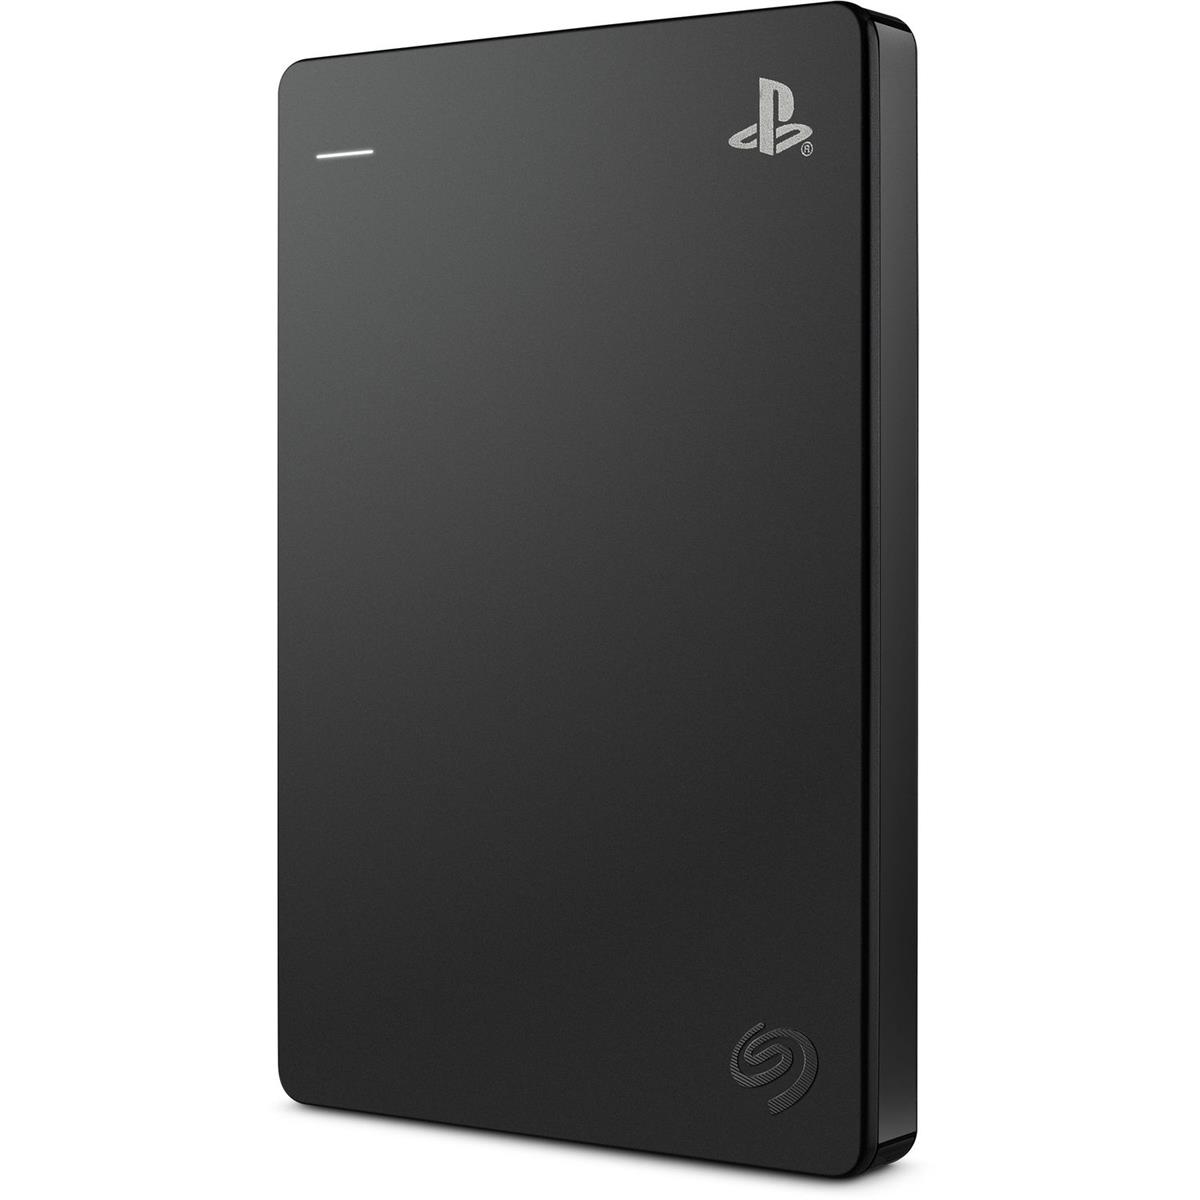 Image of Seagate 2TB Game Drive for PlayStation 4